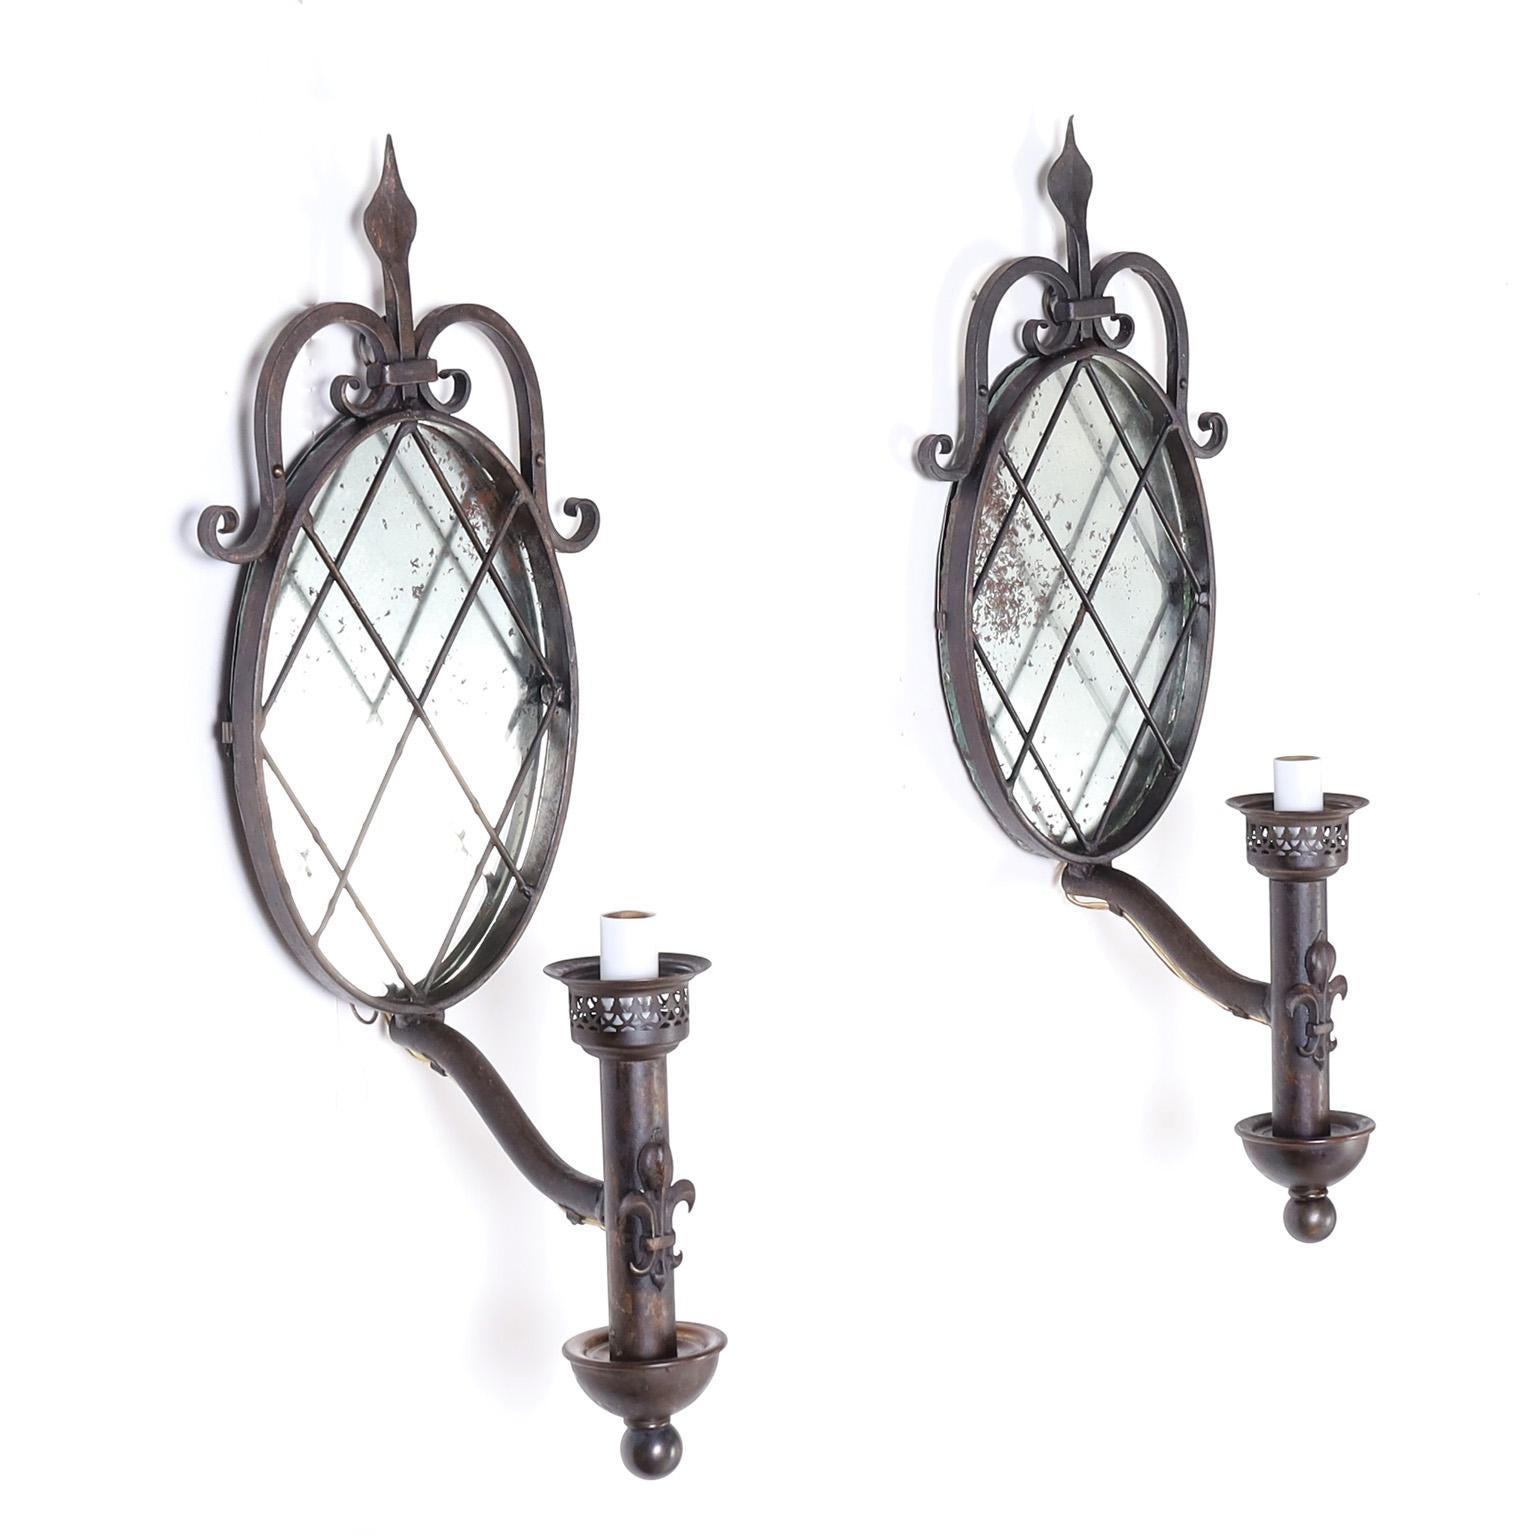 Charming pair of French antique wall sconces with hand wrought scrolled backplates with distressed mirror over metal one light arms with fleur de lis .